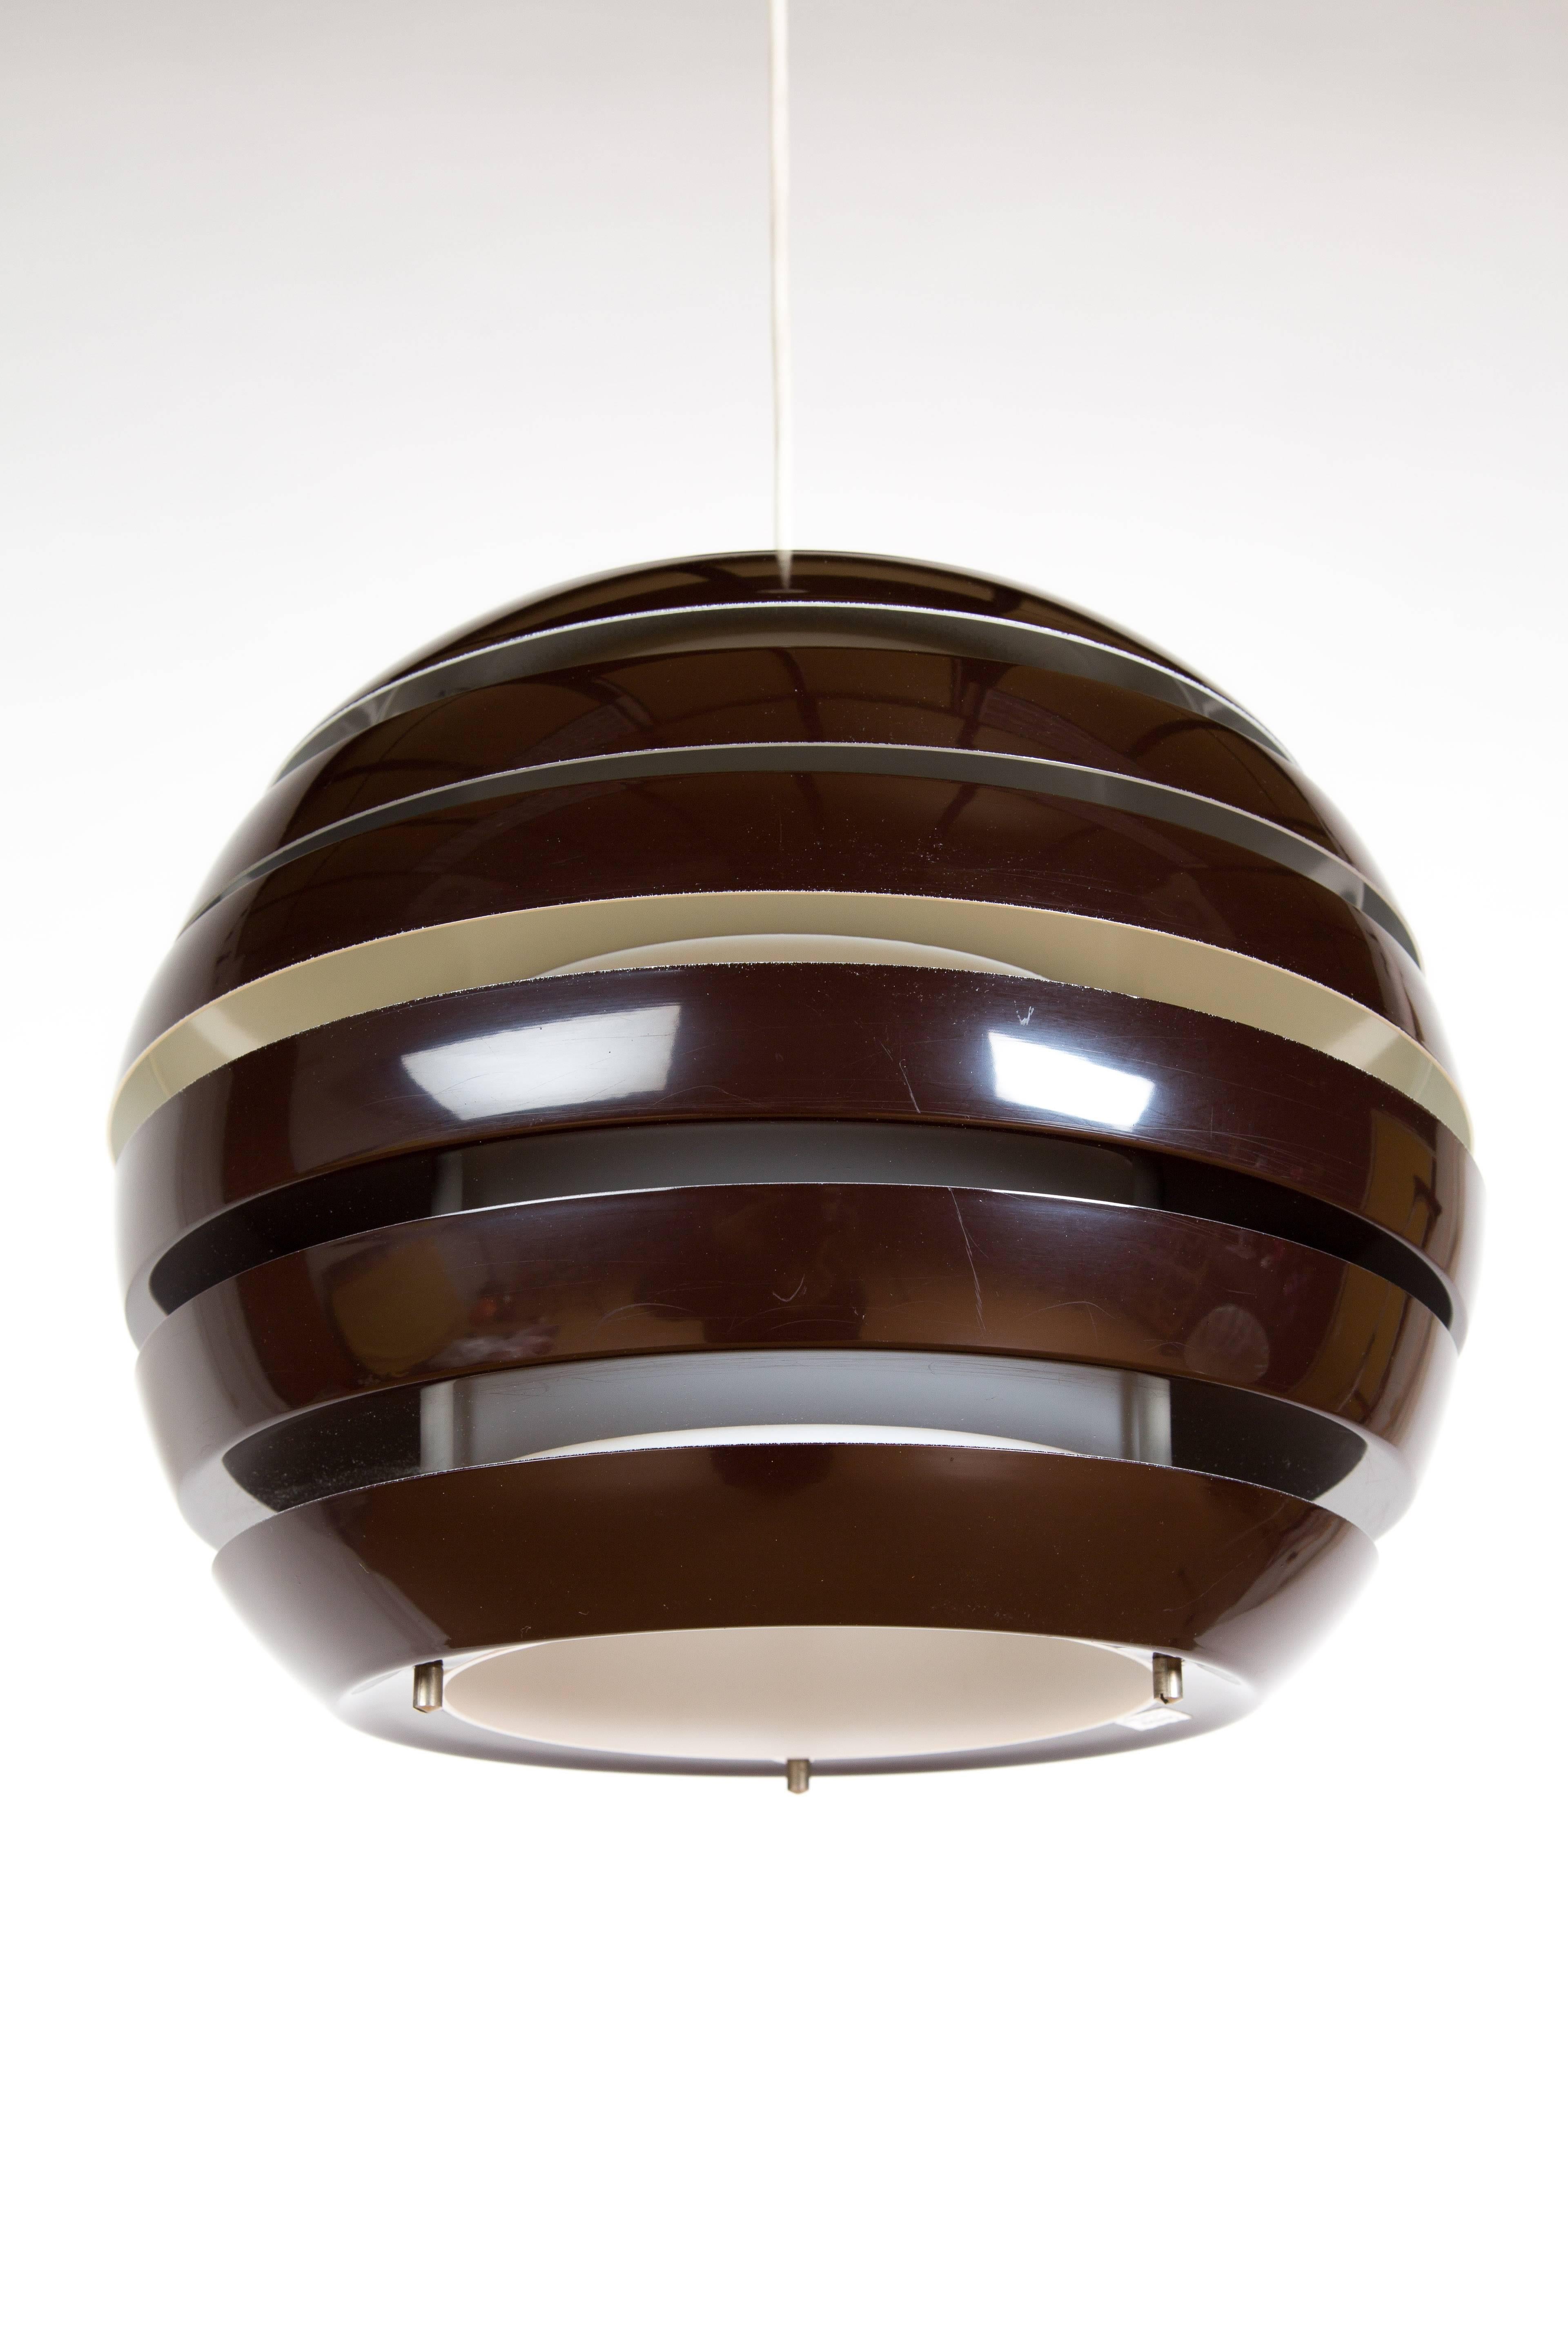 HANGING LAMP LE MONDE . Brown metal lamp designed by Carl Thore for Granhaga in Sweden. The outsite is of metal and the centre is of illuminating plastic.